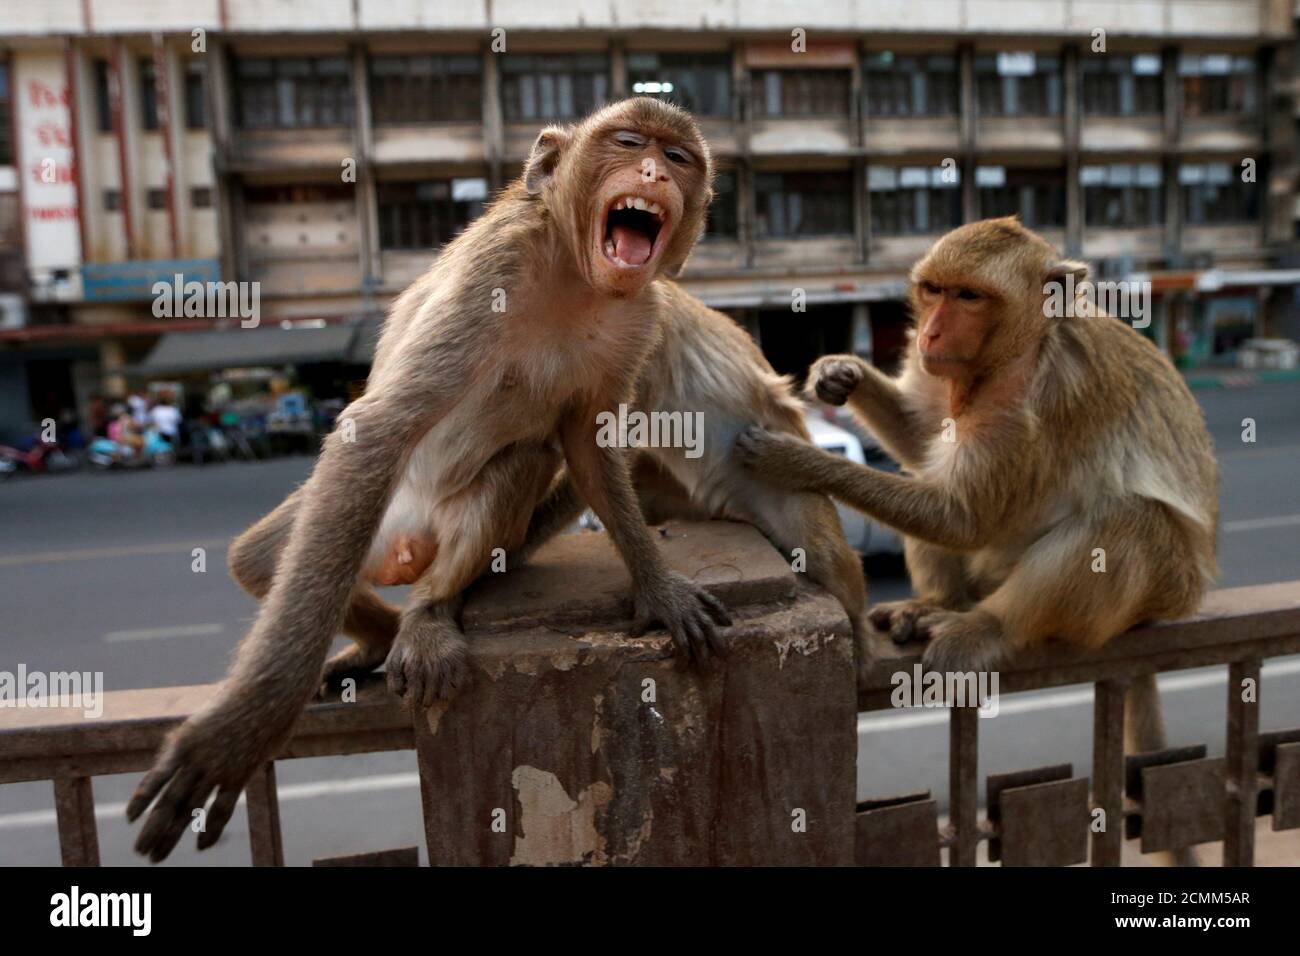 Monkeys are seen over a fence near Prang Sam Yod temple, following significant impact on tourism after the outbreak of coronavirus disease 2019 (COVID-19) spread, in Lopburi, Thailand March 17, 2020. Picture taken March 17, 2020. REUTERS/Soe Zeya Tun Stock Photo